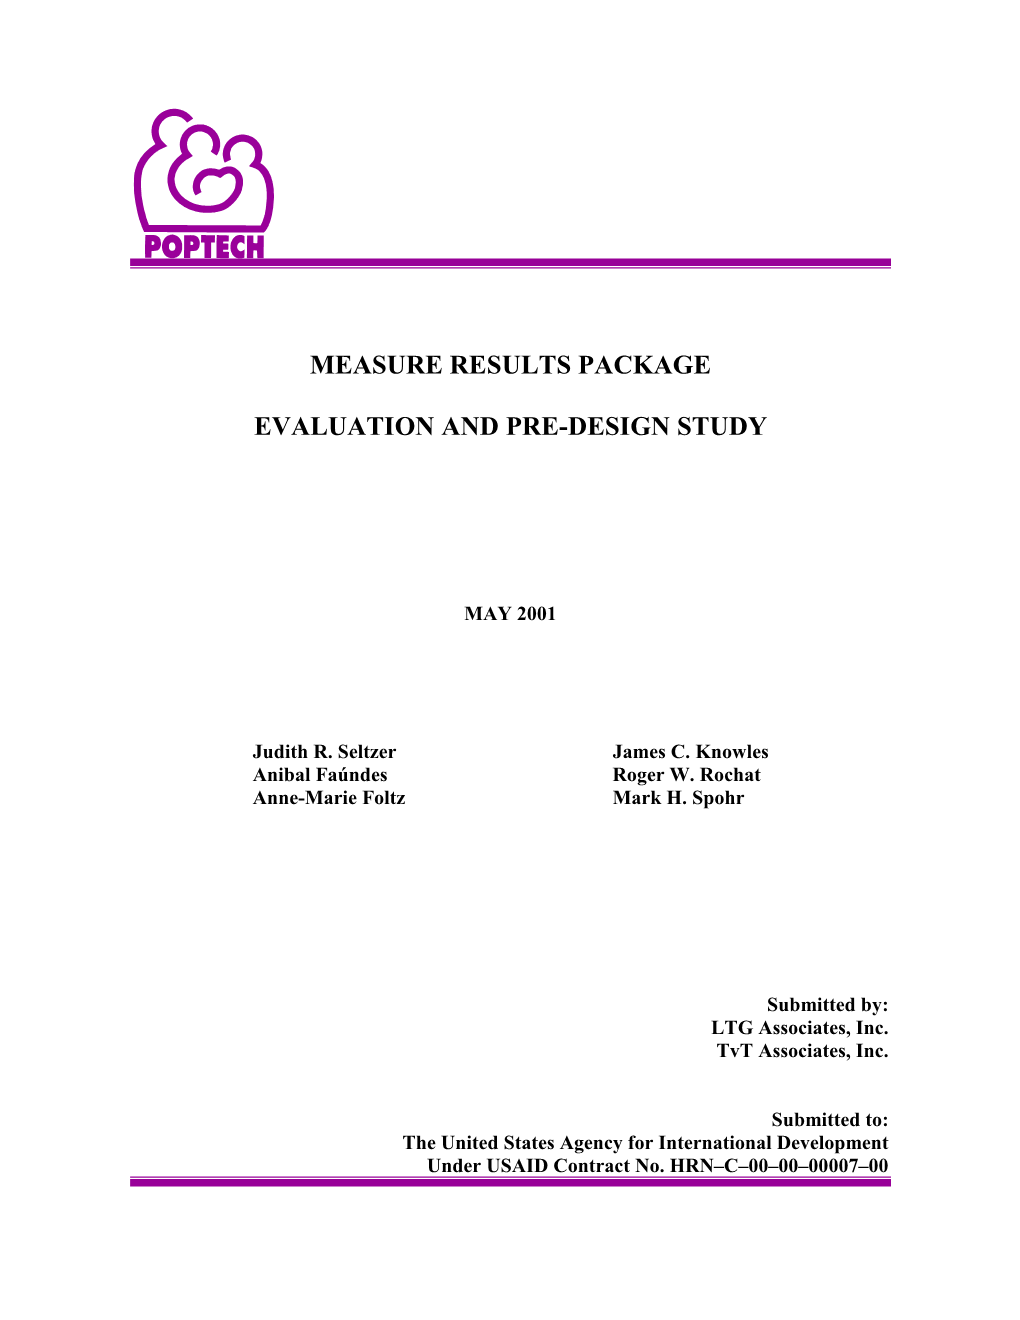 Measure Results Package Evaluation and Pre